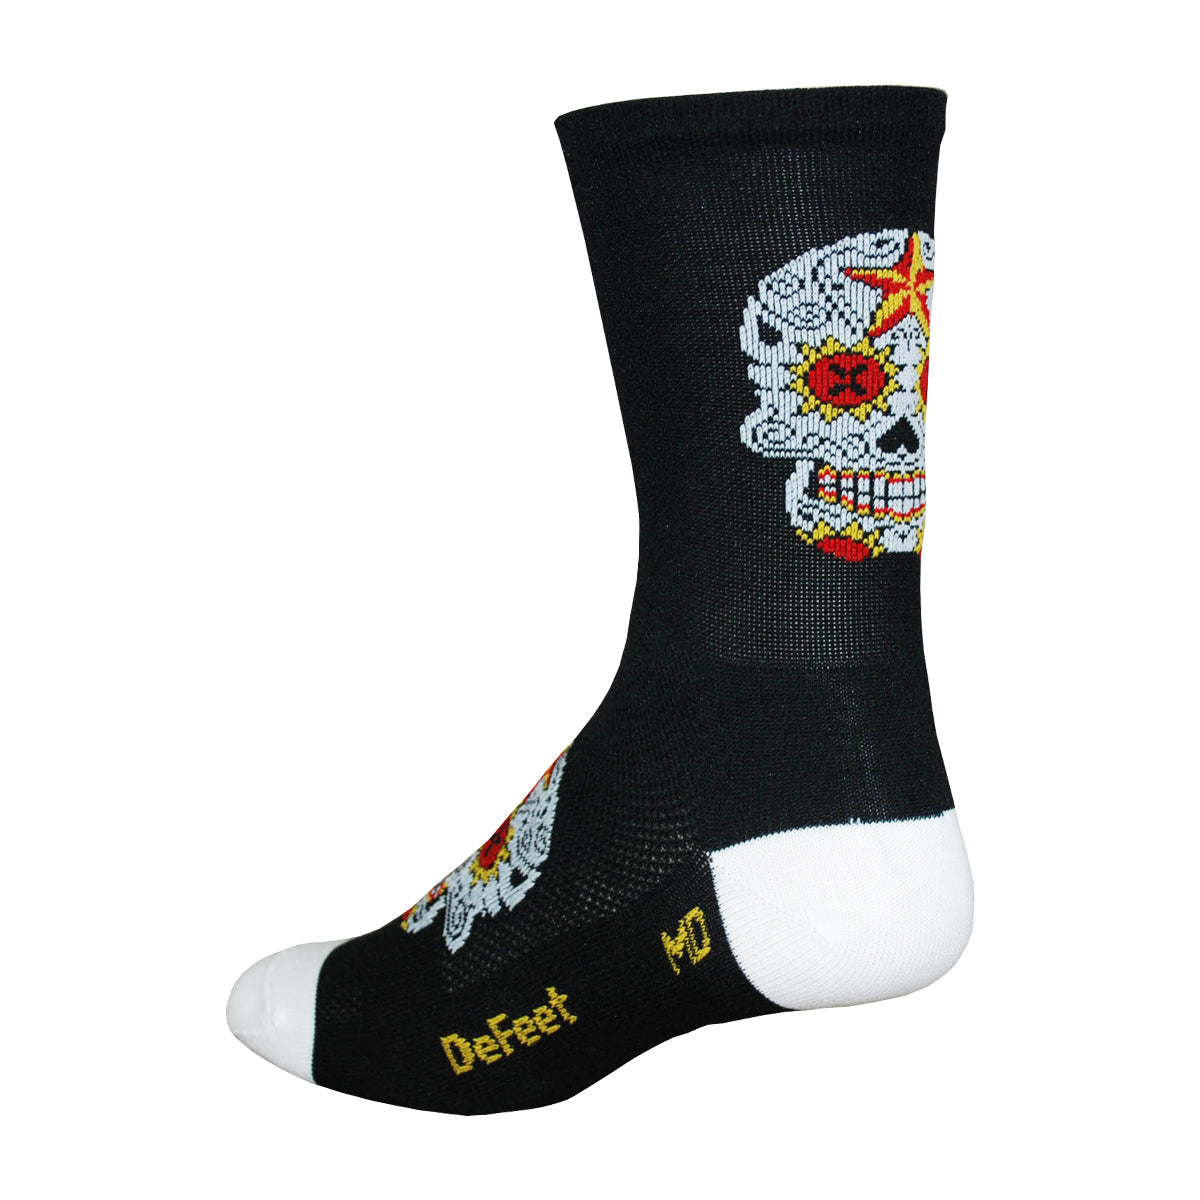 black cycling sock with white heel and toe and white and red sugar skull on the cuff and foot